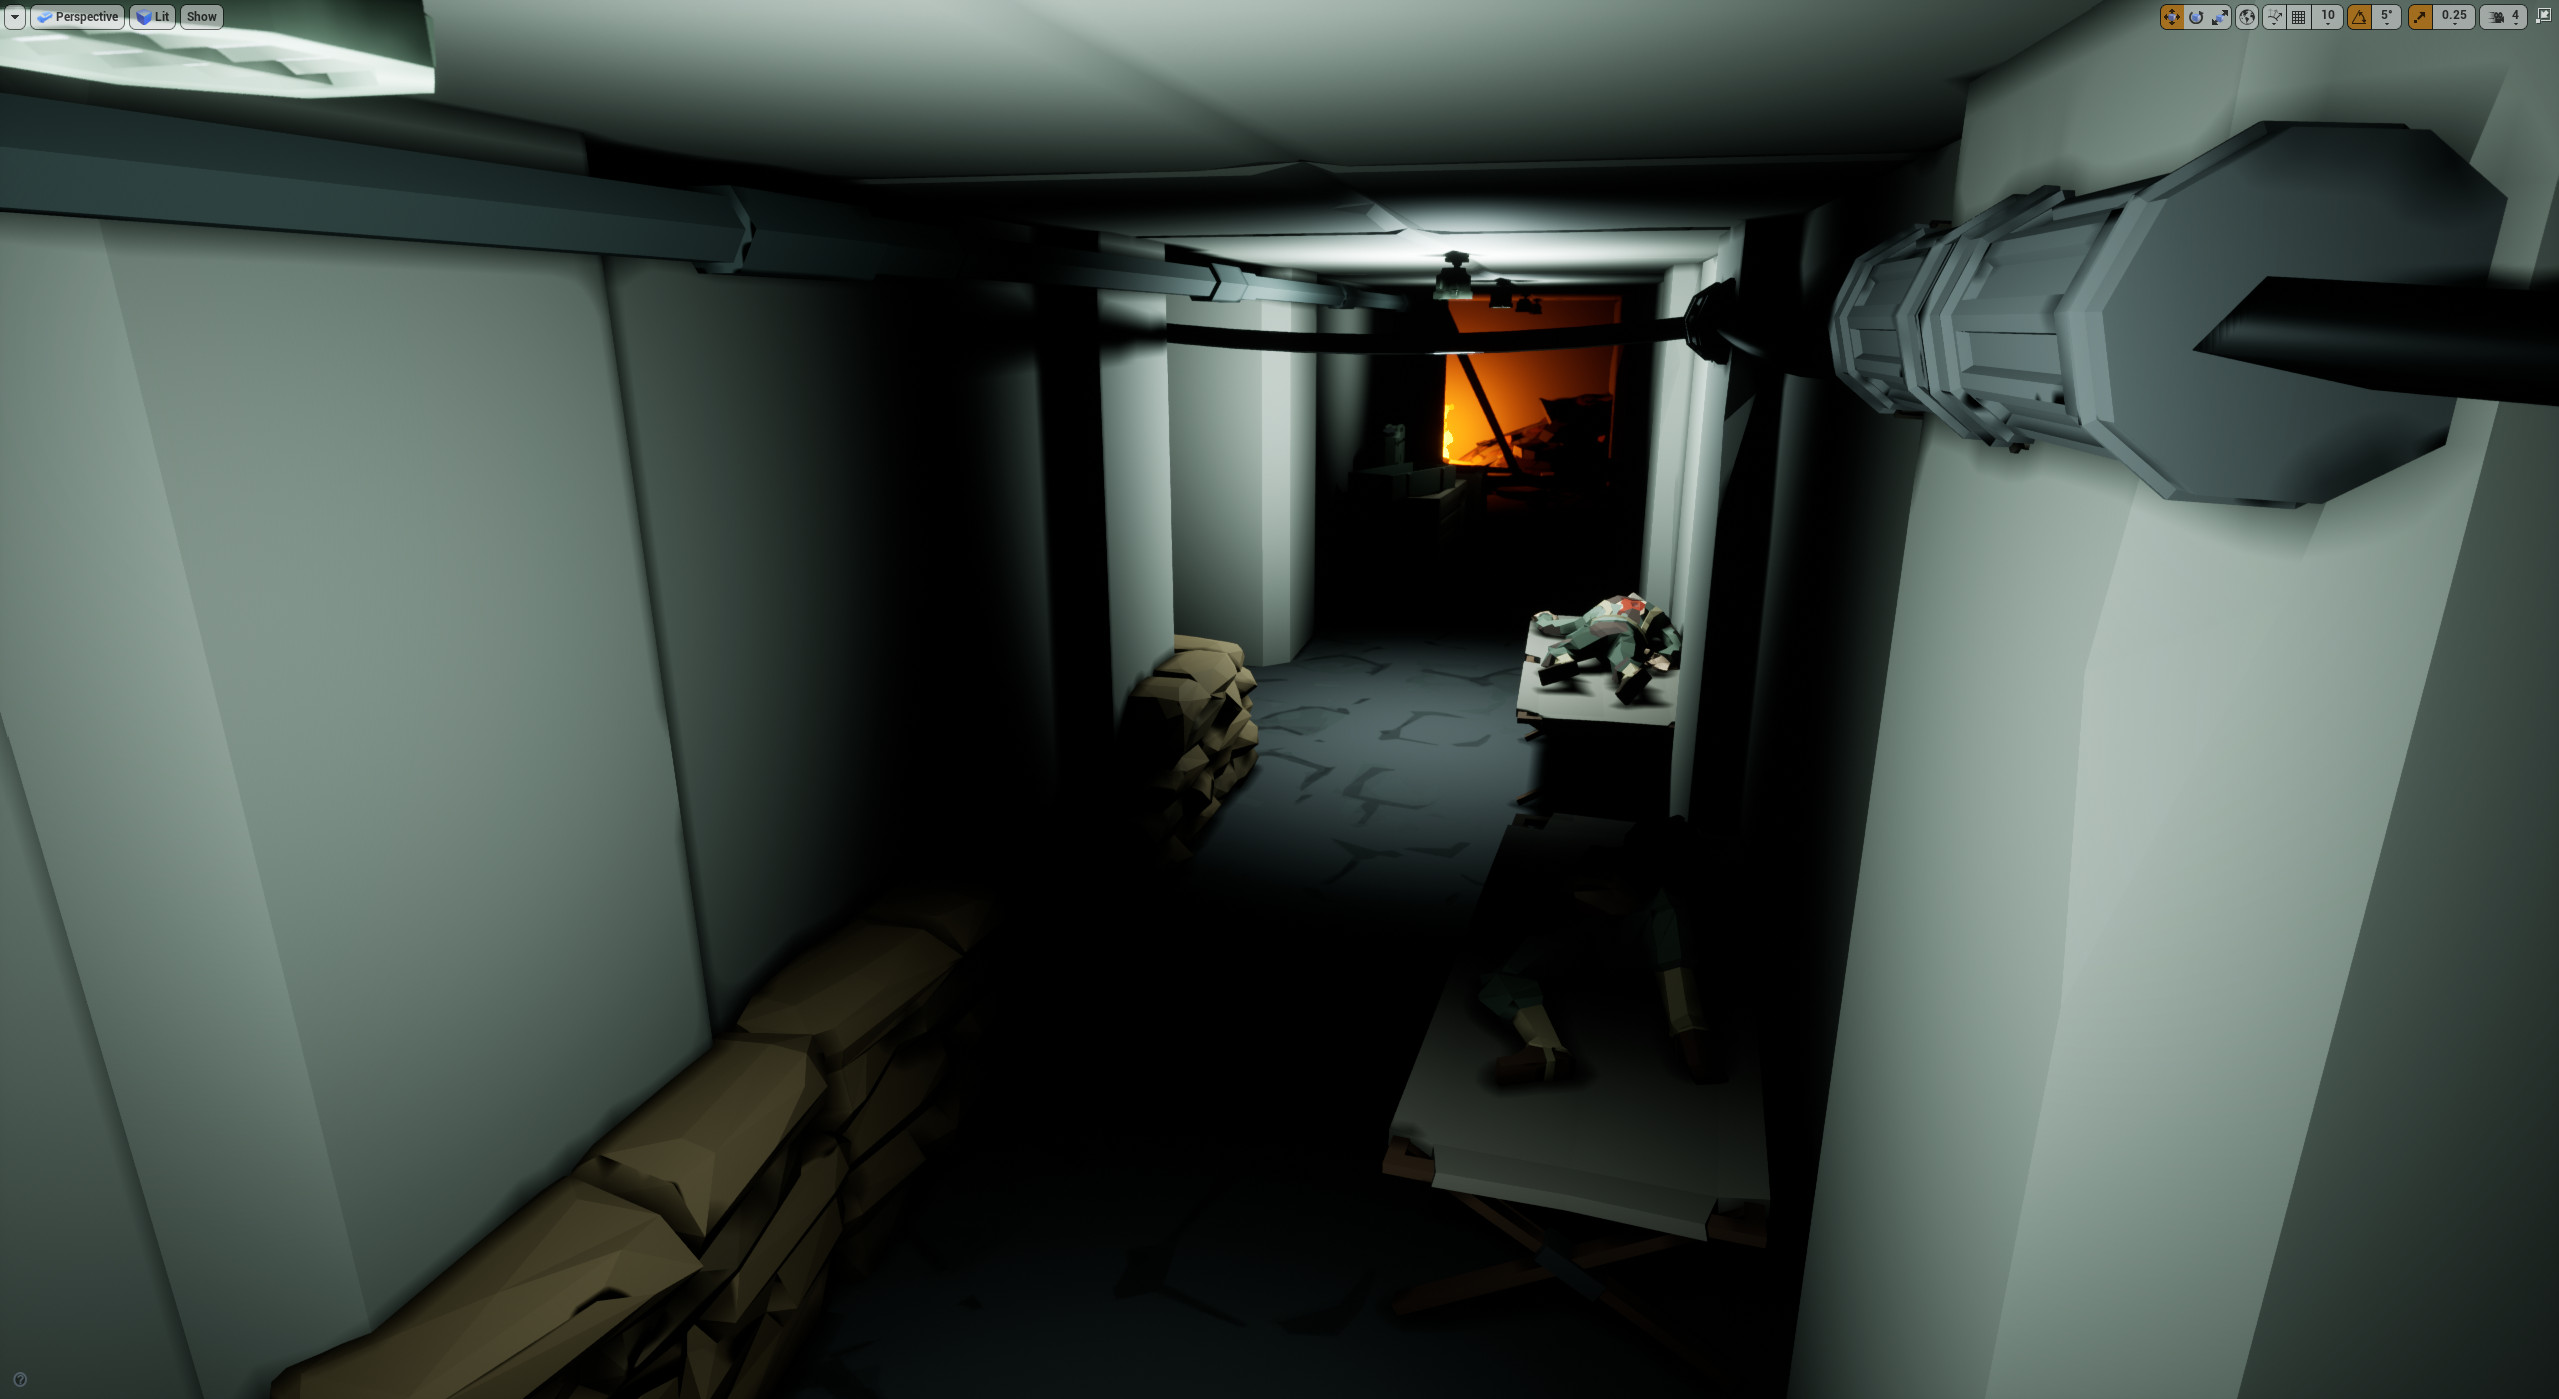 The bunker sections were deliberately small and dark with contrasting light to give the player an uneasy feeling navigating these underground spaces. A post-process volume was used to control shadow coloring and add some more bloom.